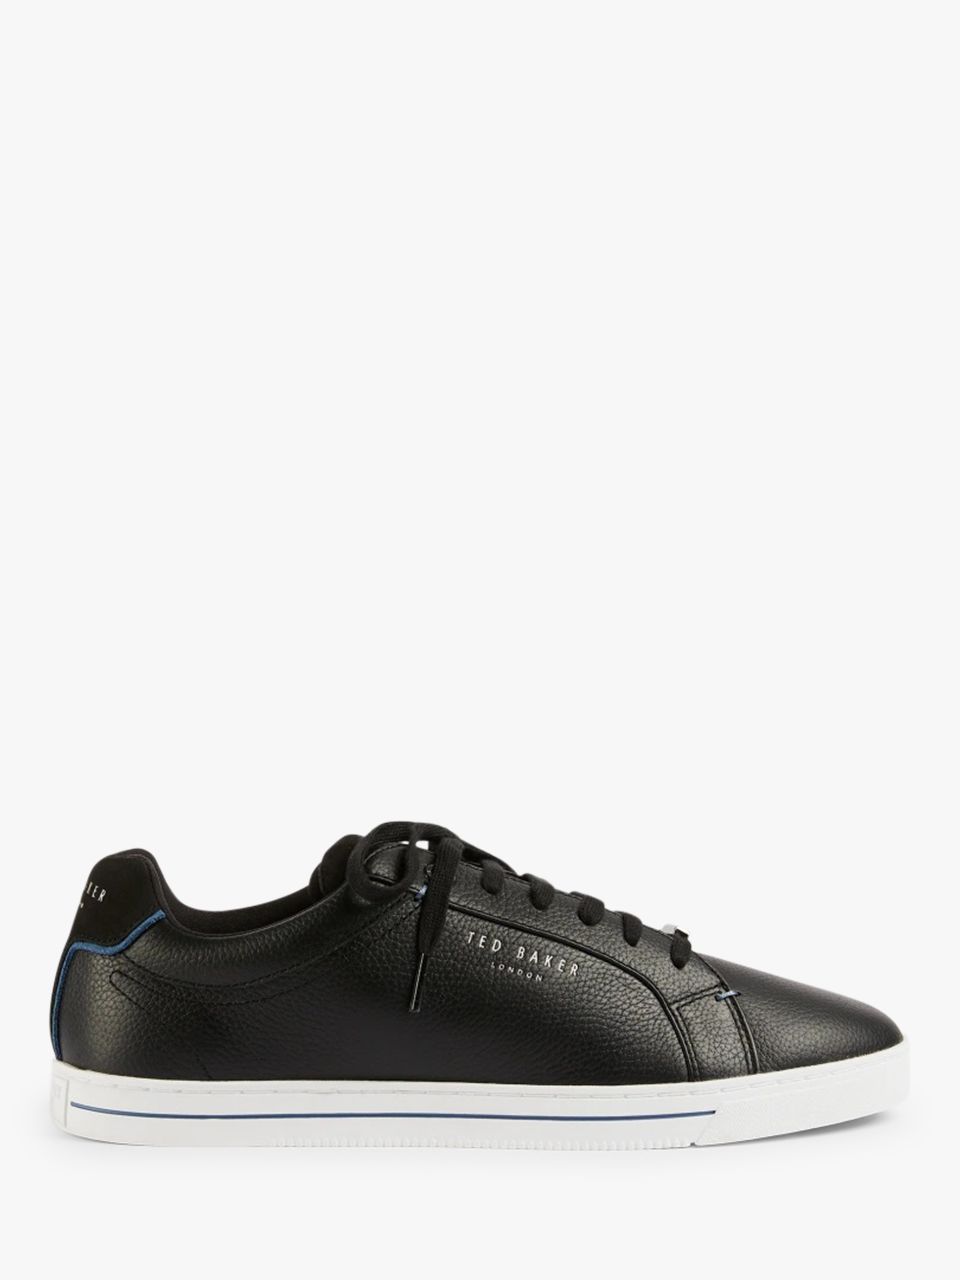 Ted Baker Wylee Leather Trainers, Black at John Lewis & Partners